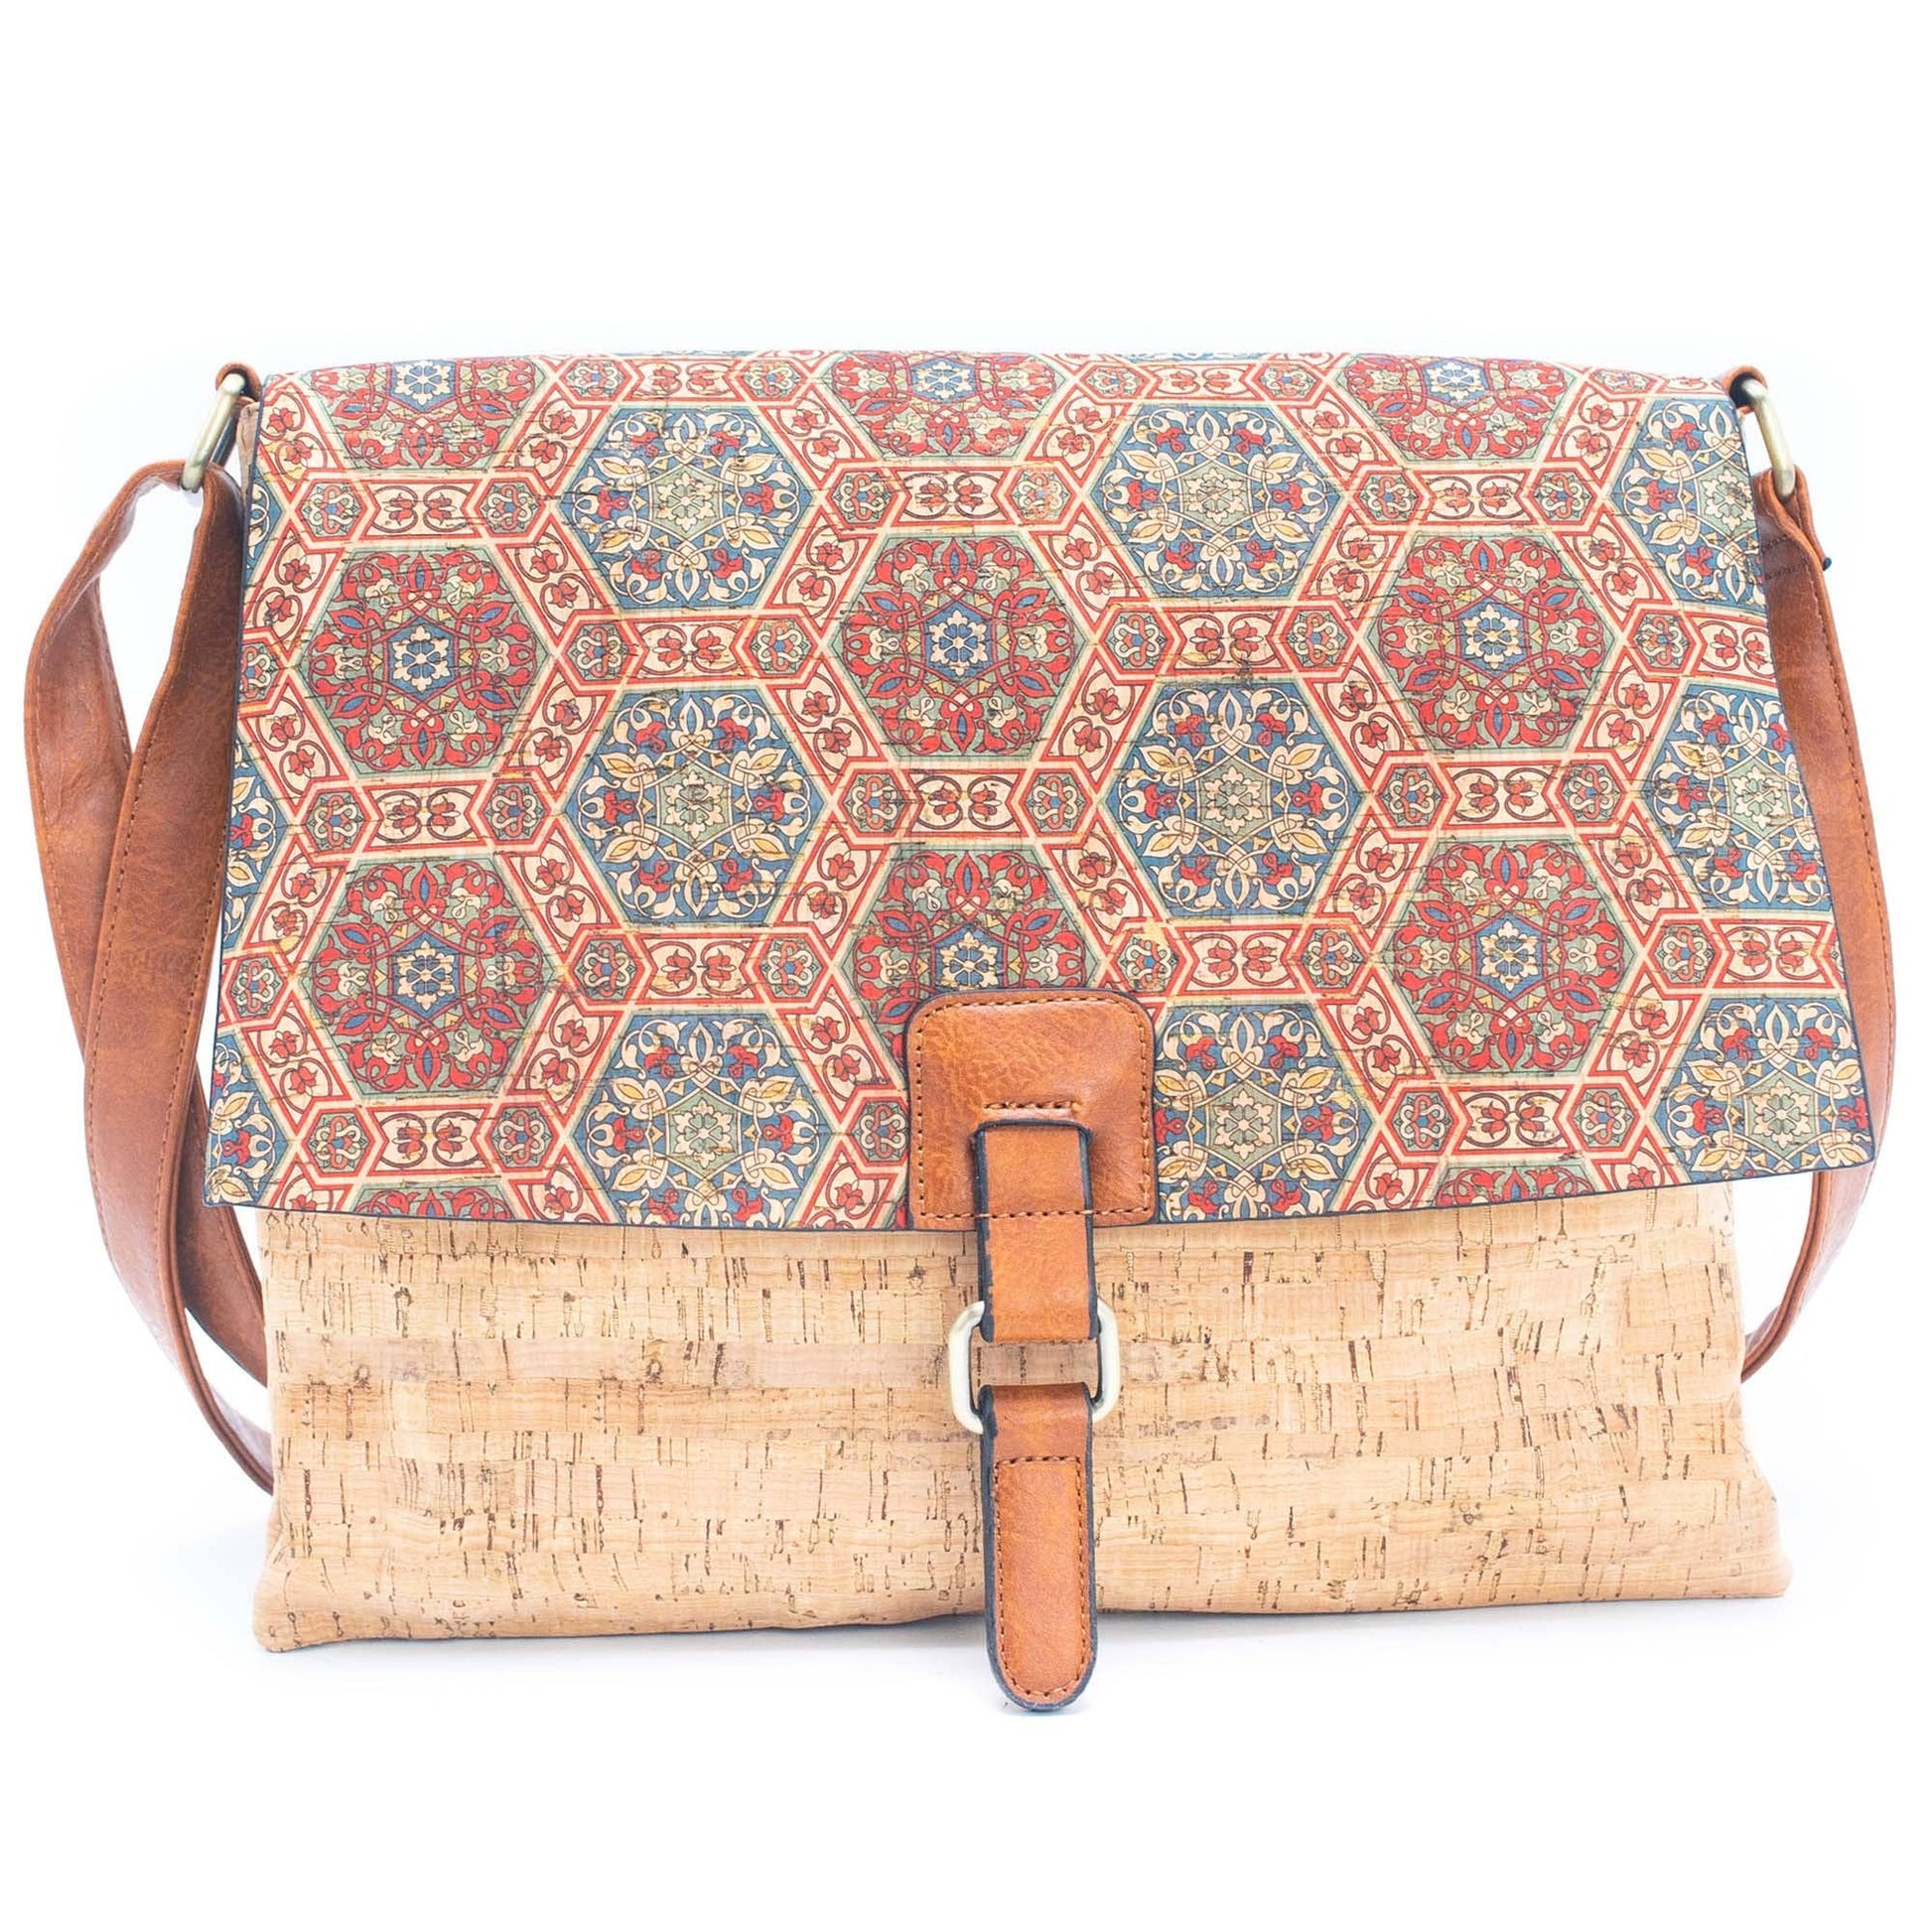 Cork Crossbody Bag with Mosaic and Floral Prints BAGD-464-14